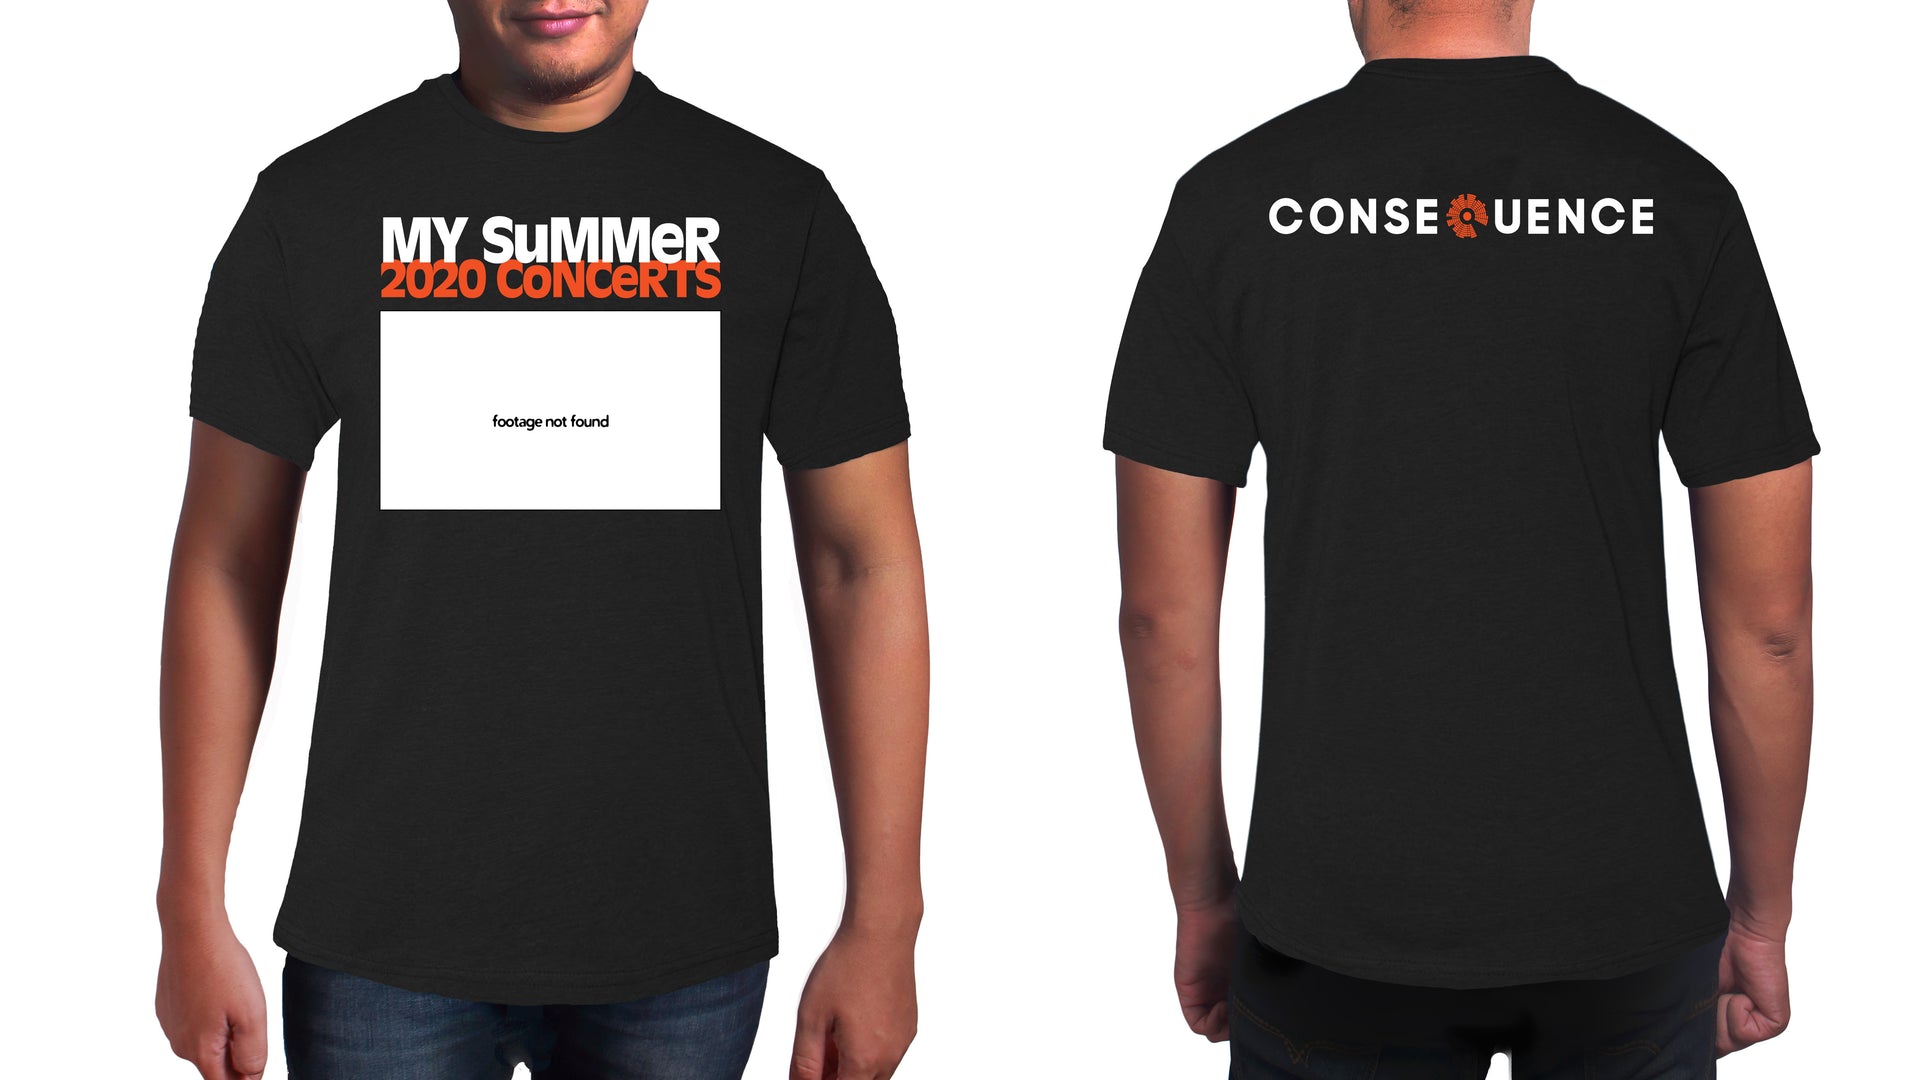 Our New T-Shirt Commemorates the Summer 2020 Concert Season (That Was Not)